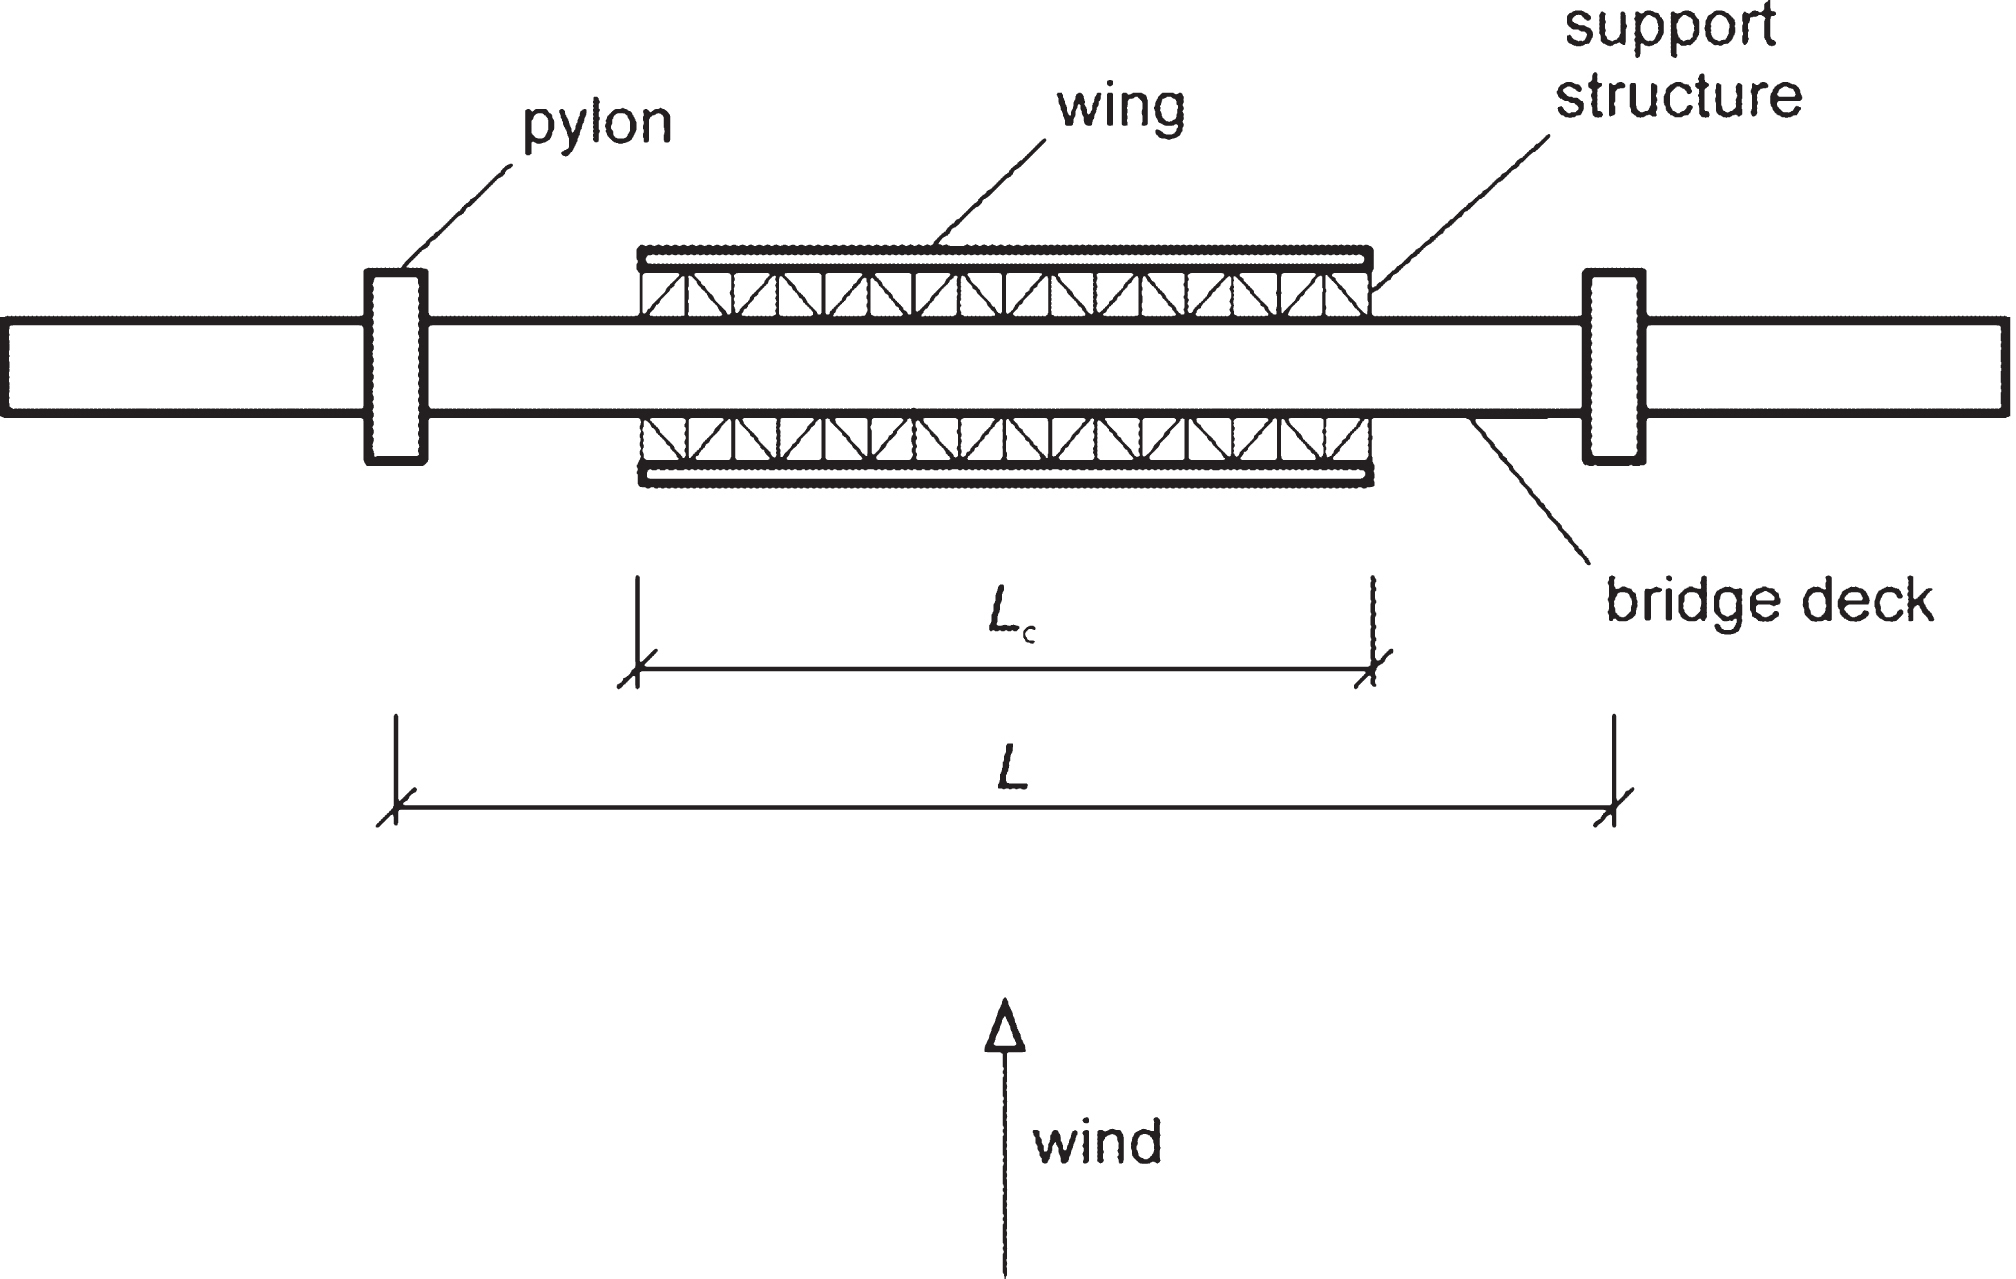 Bridge with eccentric-wing flutter stabilizer around center of main span – plan view (not to scale).